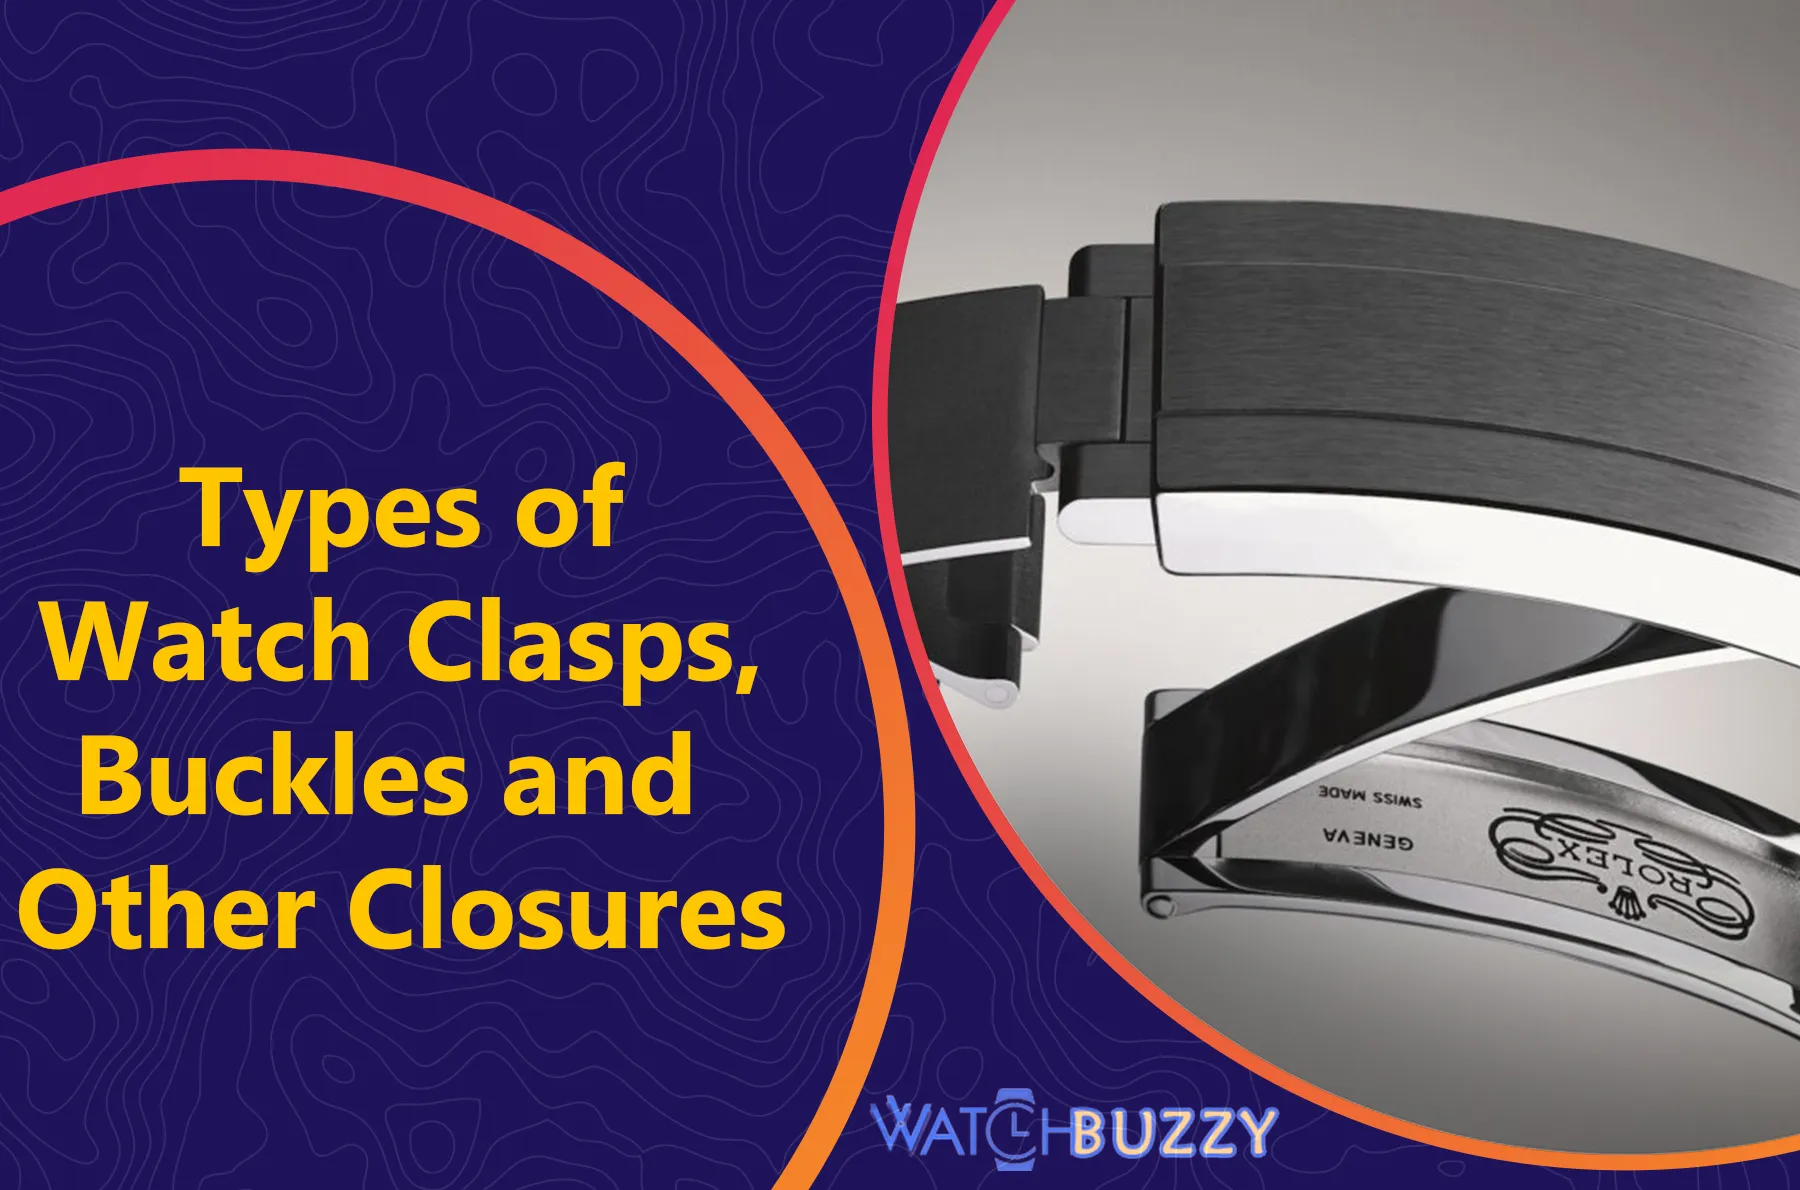 Types of Watch Clasps, Buckles and Other Closures